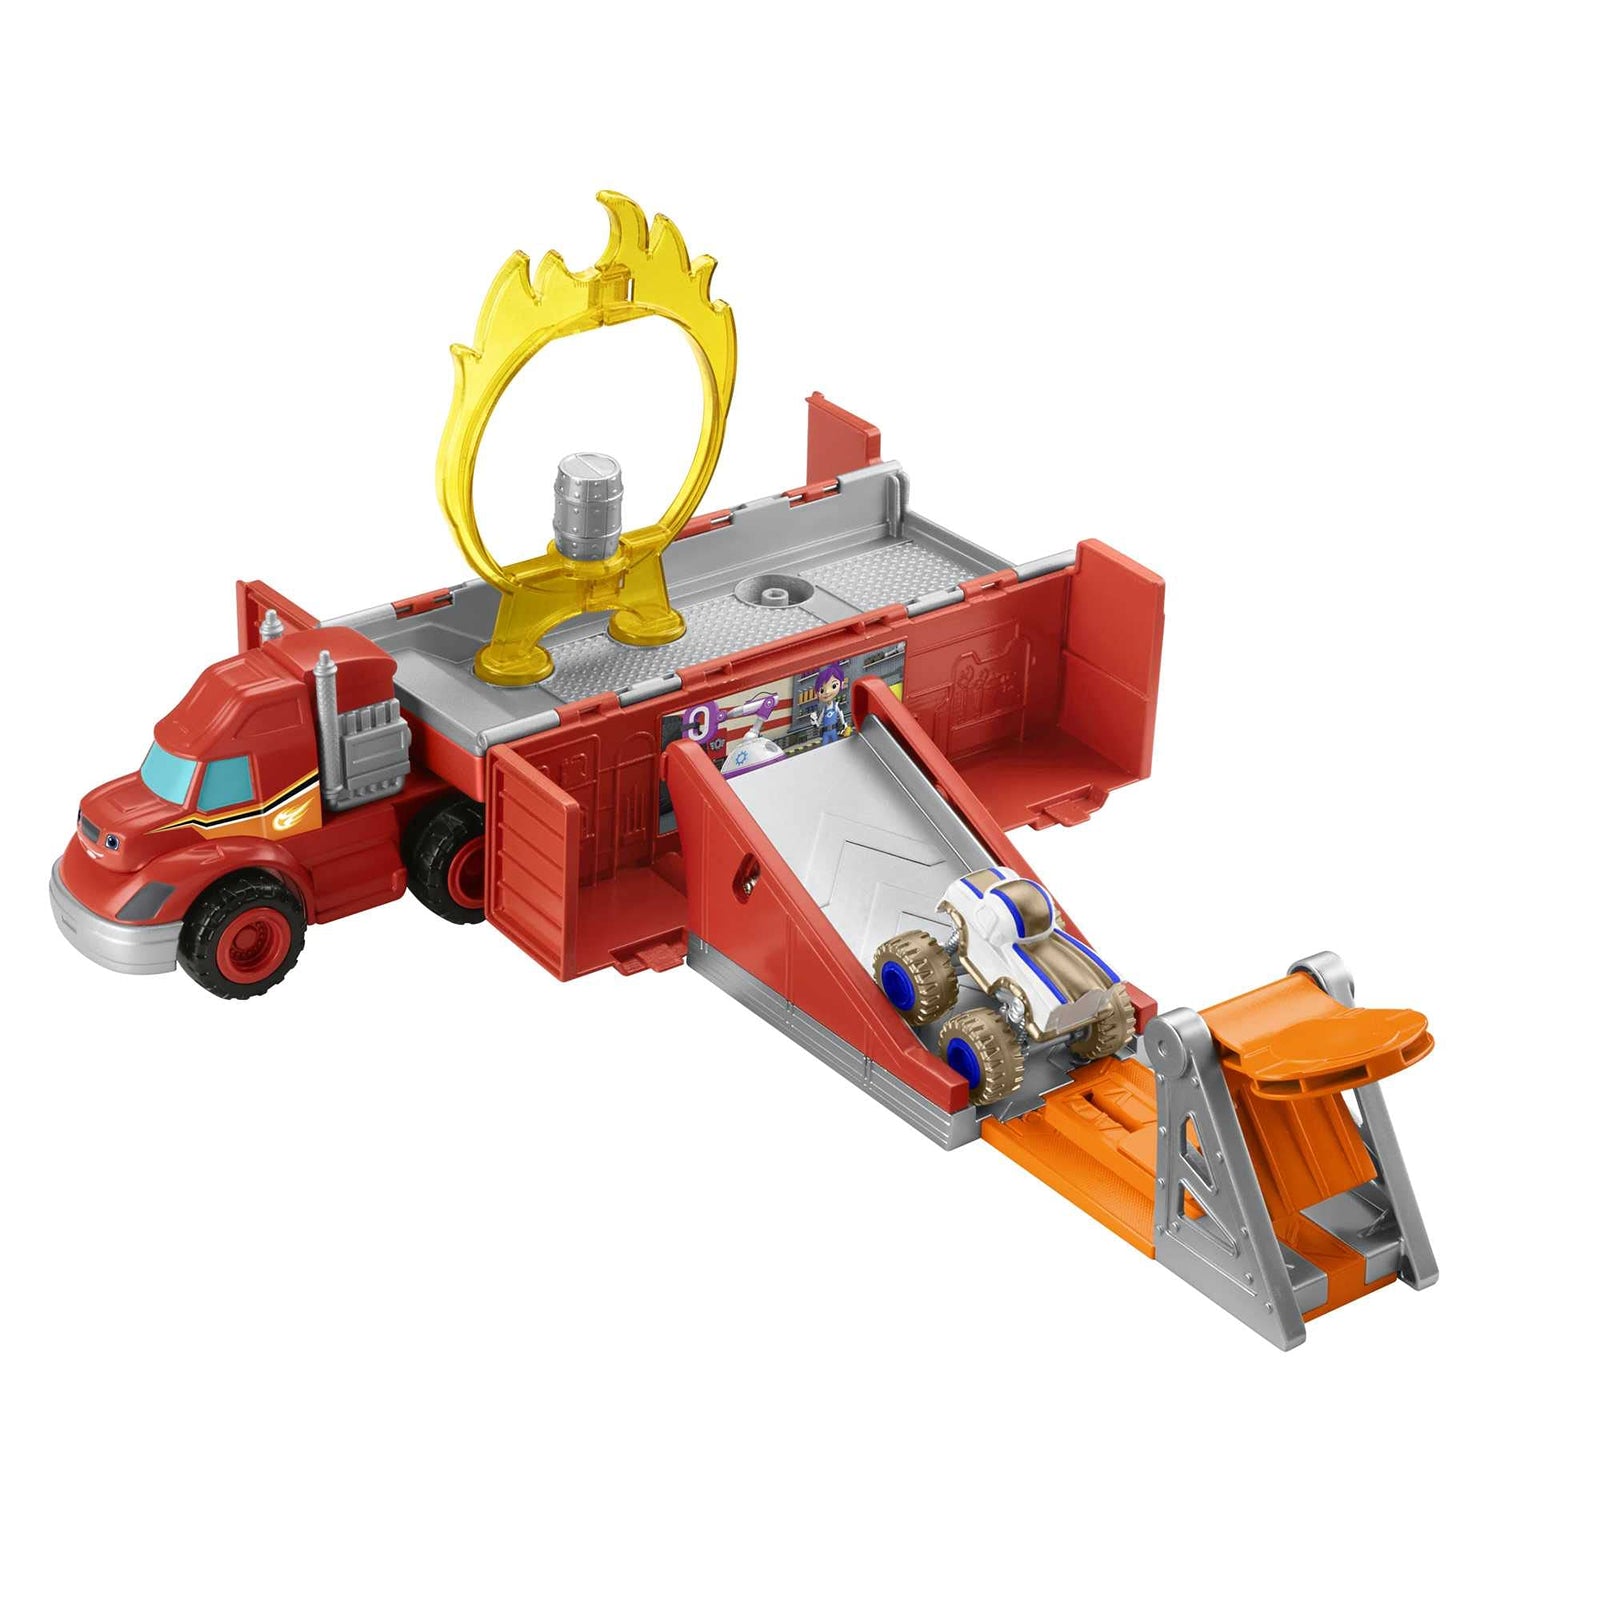 Fisher-Price Blaze and the Monster Machines Launch & Stunts Hauler, Transforming Vehicle and Playset with Die-Cast Monster Truck for Kids Ages 3 and Up